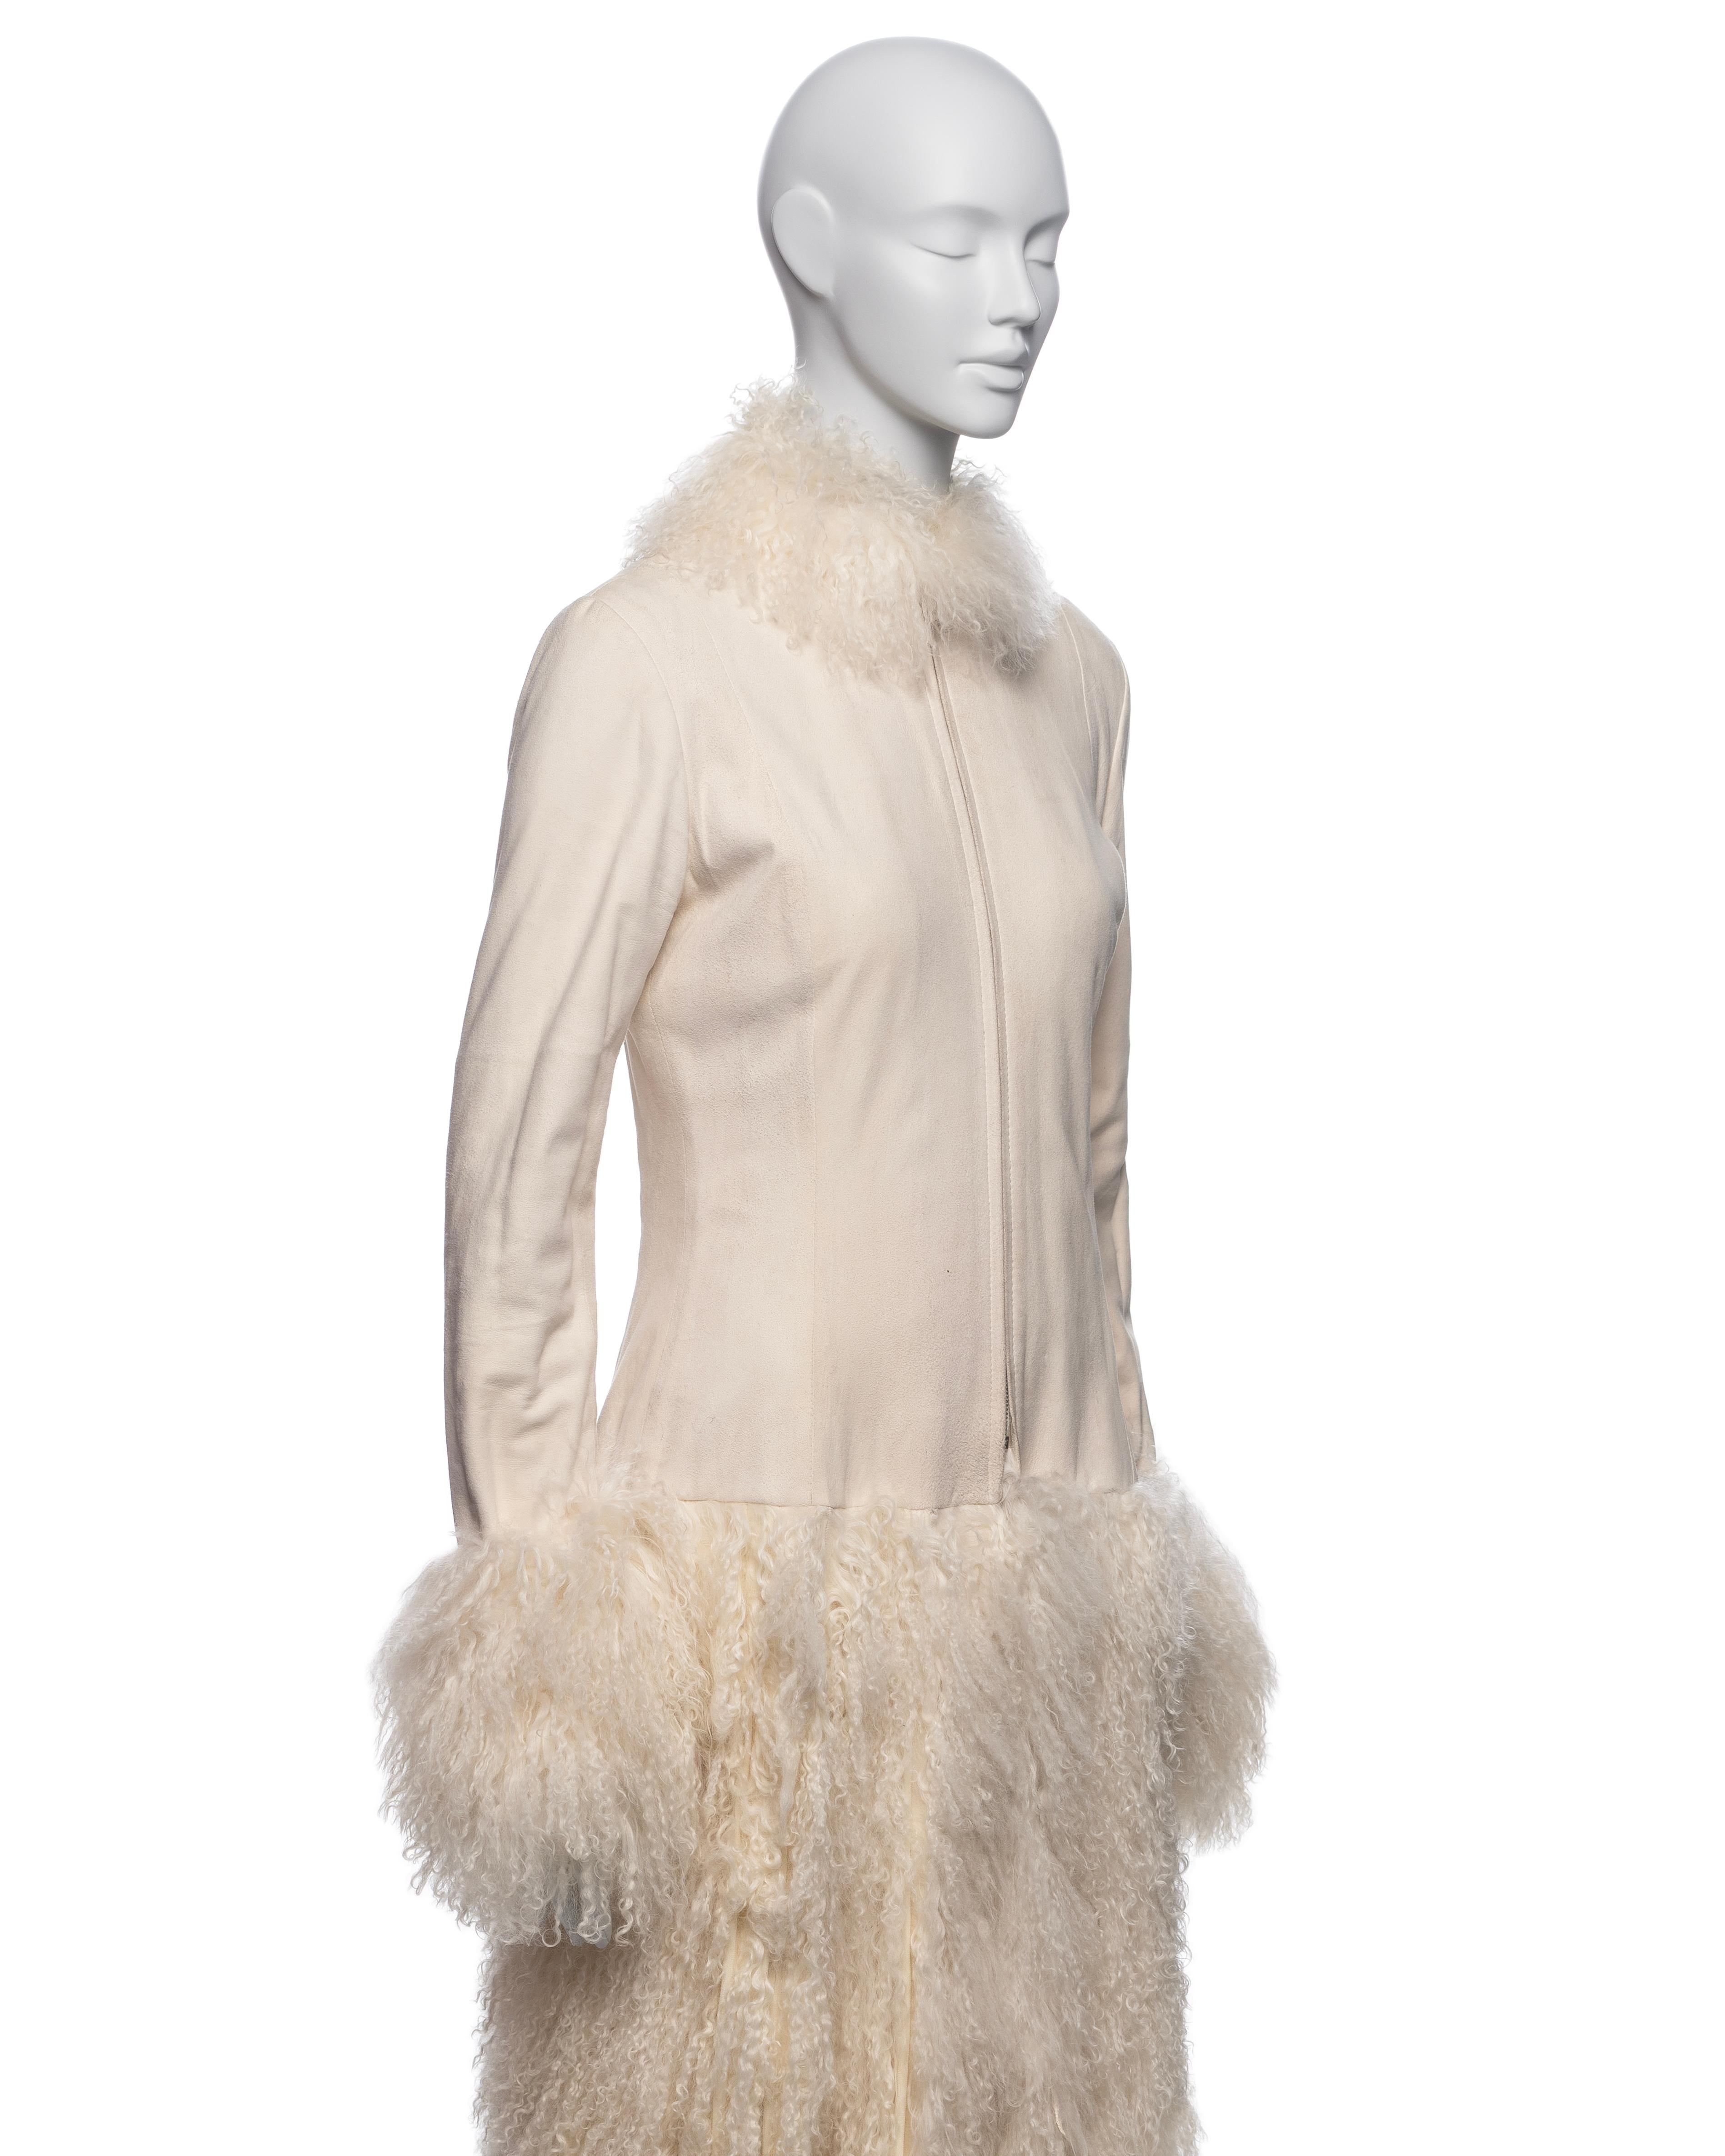 Jean Paul Gaultier White Mongolian Lamb Fur and Leather Coat Dress, FW 2006 For Sale 5